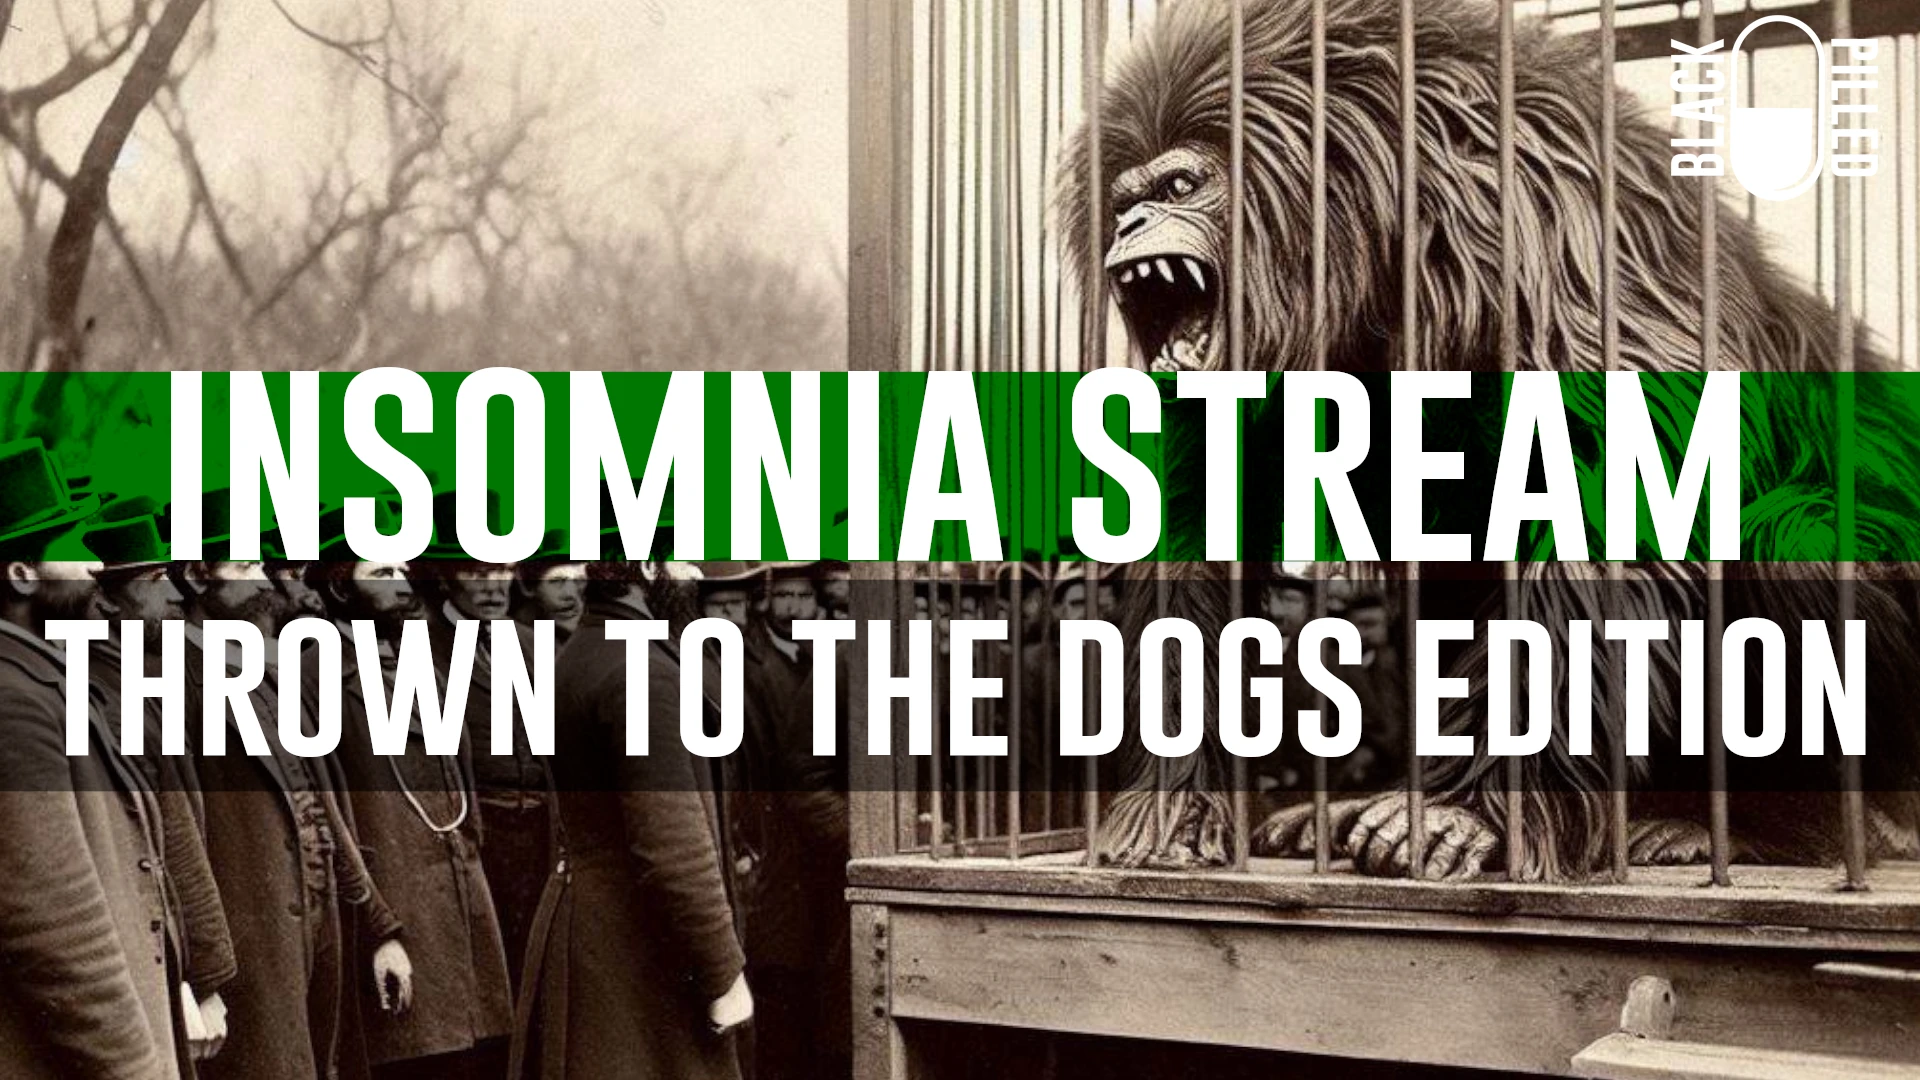 INSOMNIA STREAM: THROWN TO THE DOGS EDITION